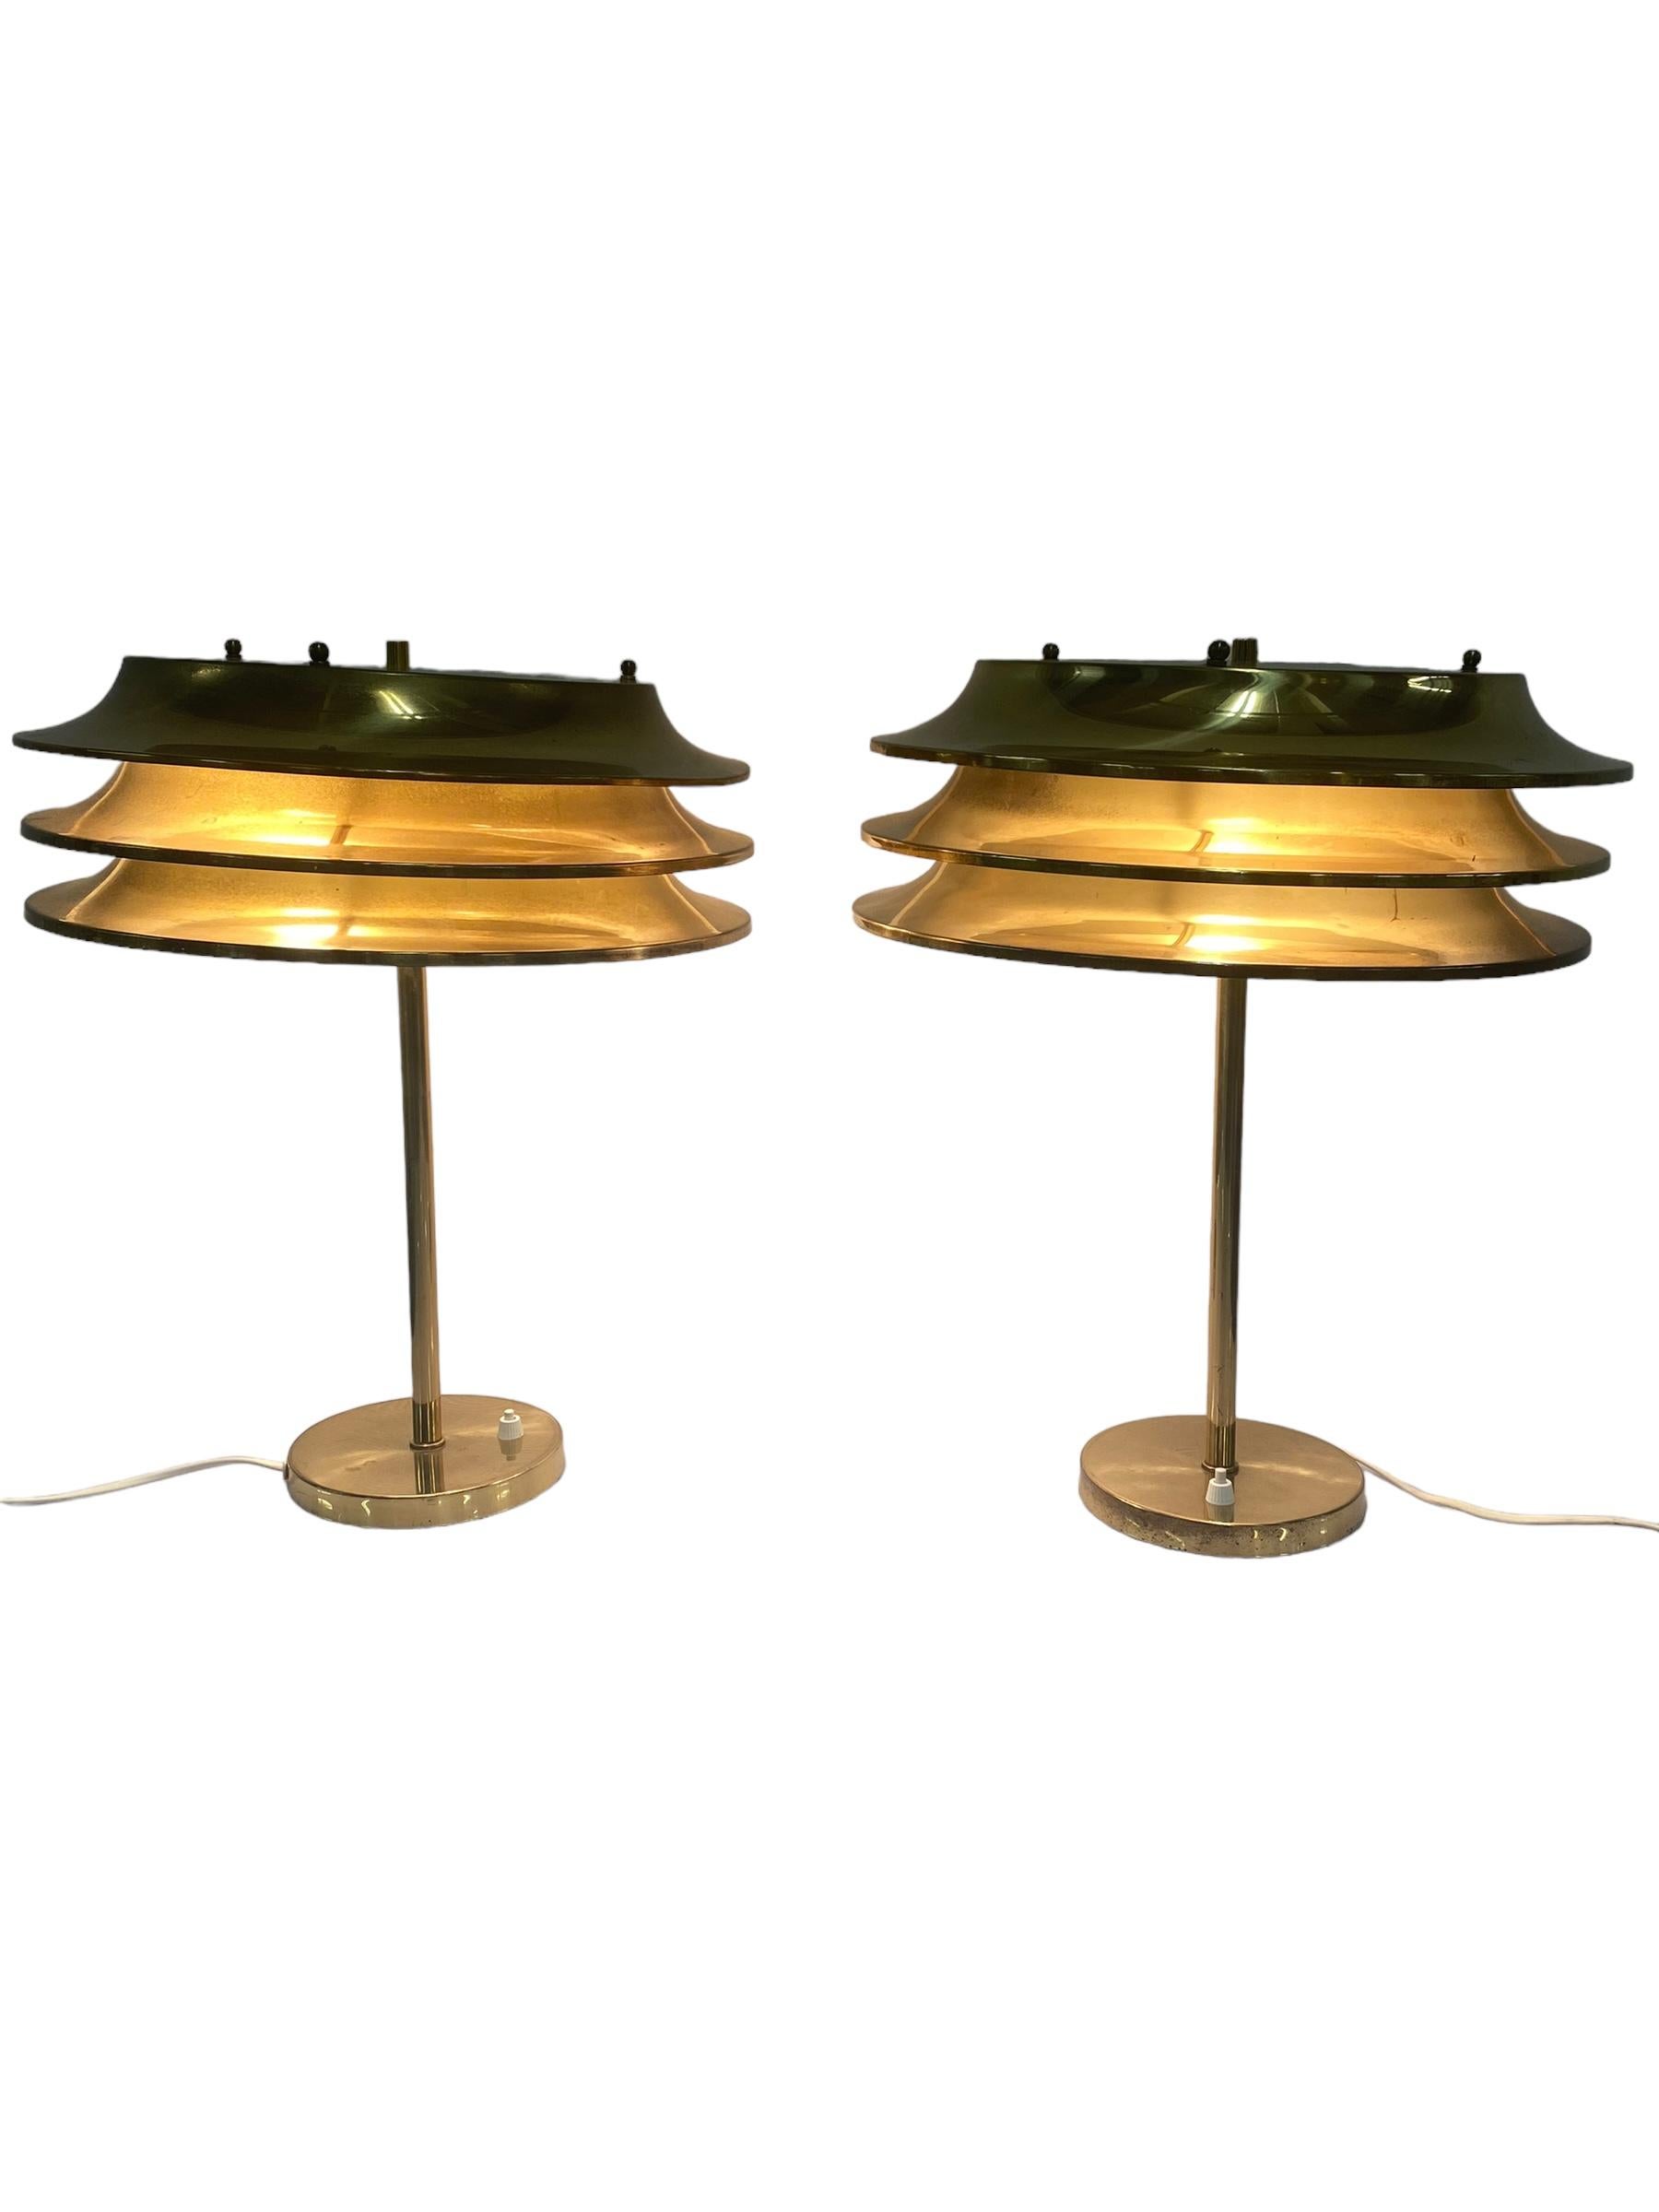 A Pair of Kai Ruokonen 'Finnmark' Table Lamps for the Vaakuna Hotel, Lynx, 1970s For Sale 6